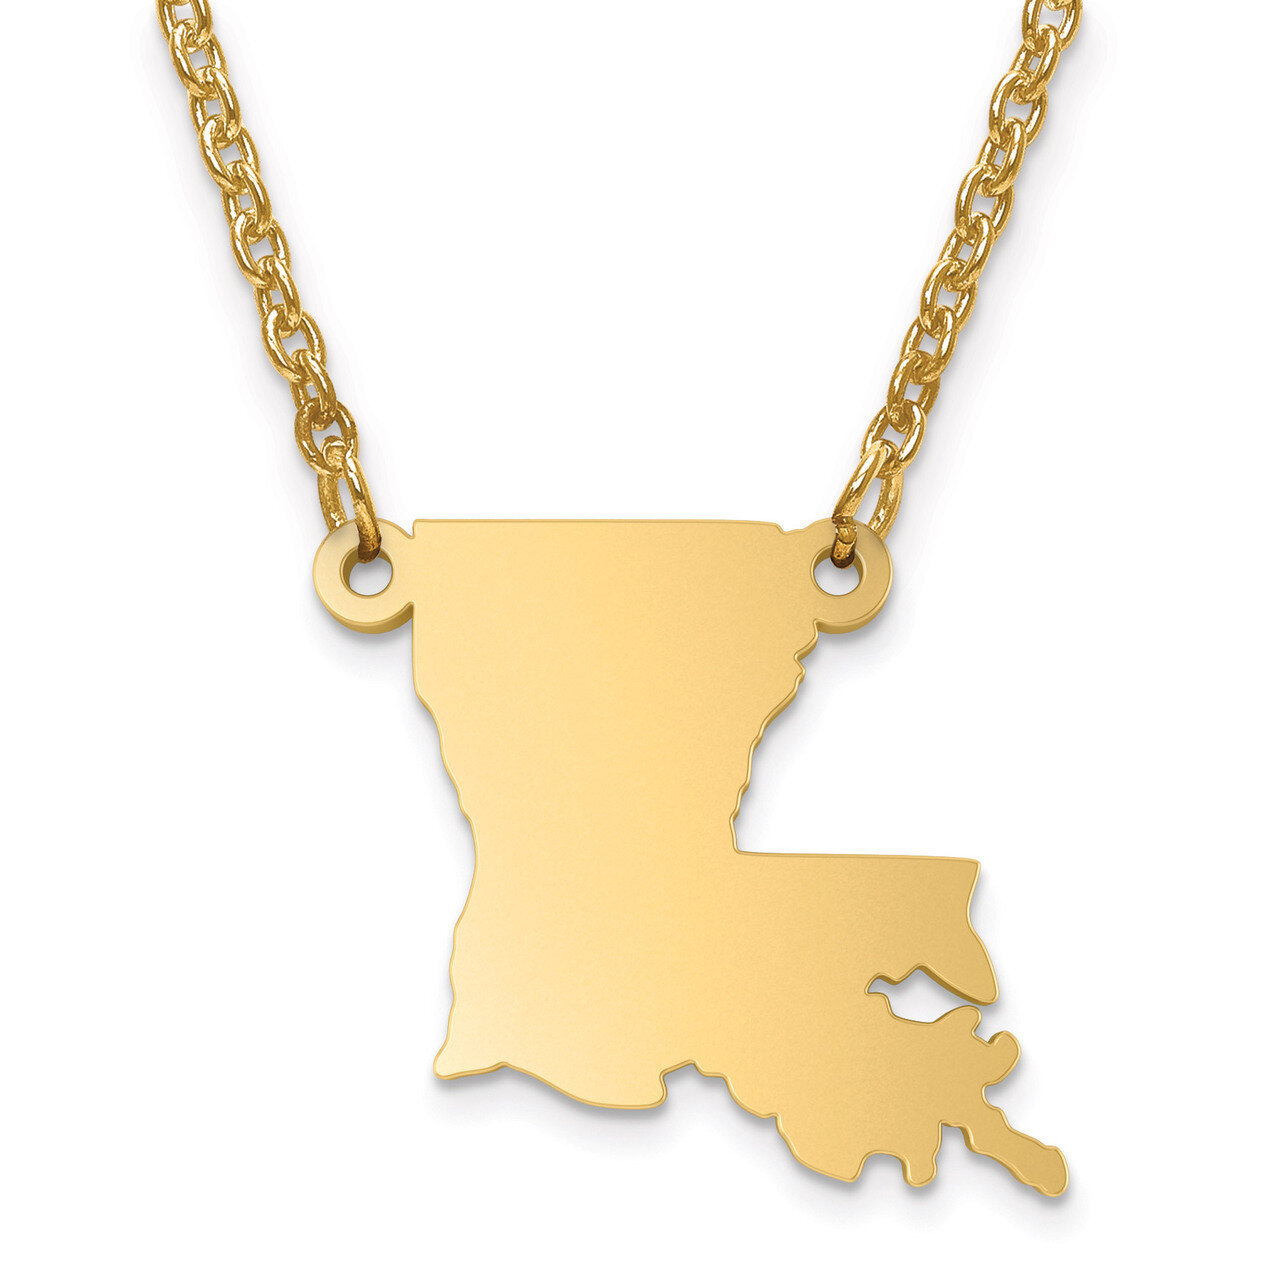 Louisiana State Pendant with Chain Engravable Gold-plated on Sterling Silver